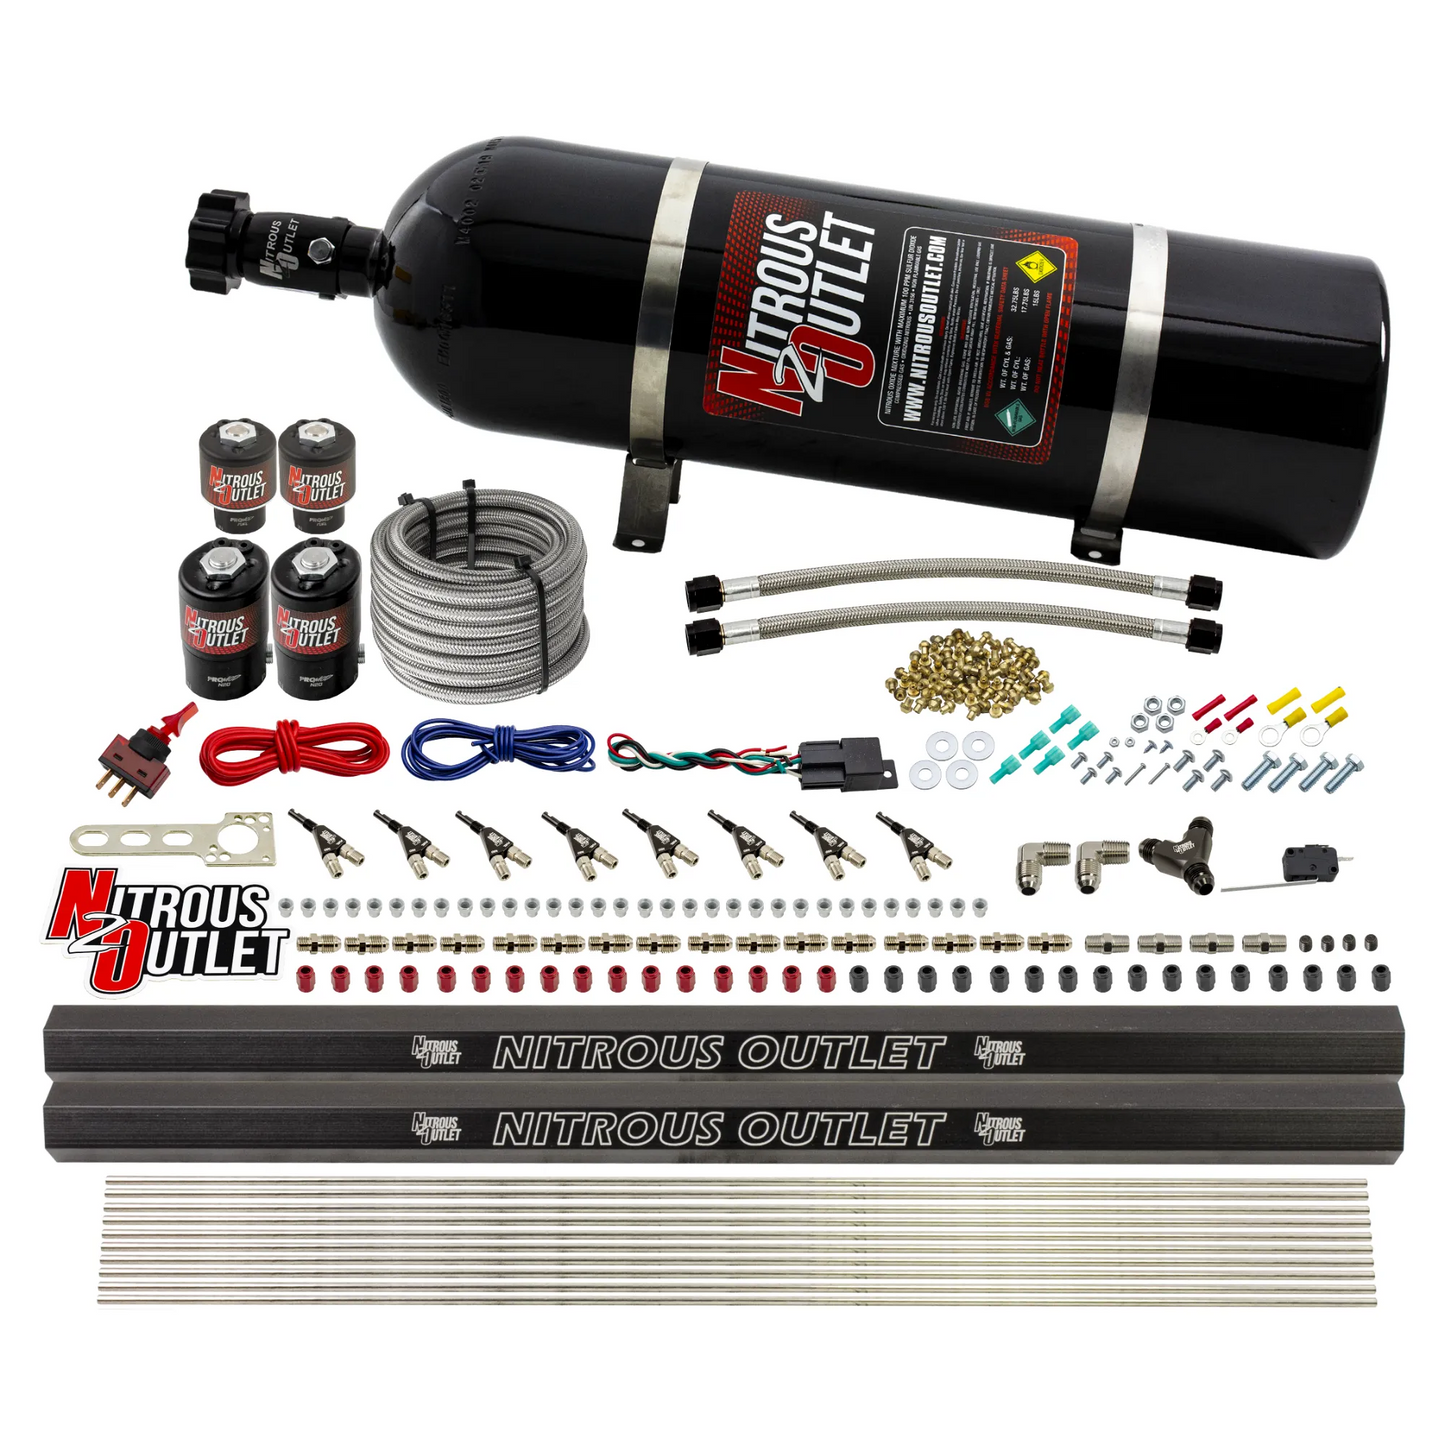 8 Cylinder Single Stage Direct Port Nitrous System with Injection Rails - Gas - .122 Nitrous/.177 Fuel - 45-55 PSI